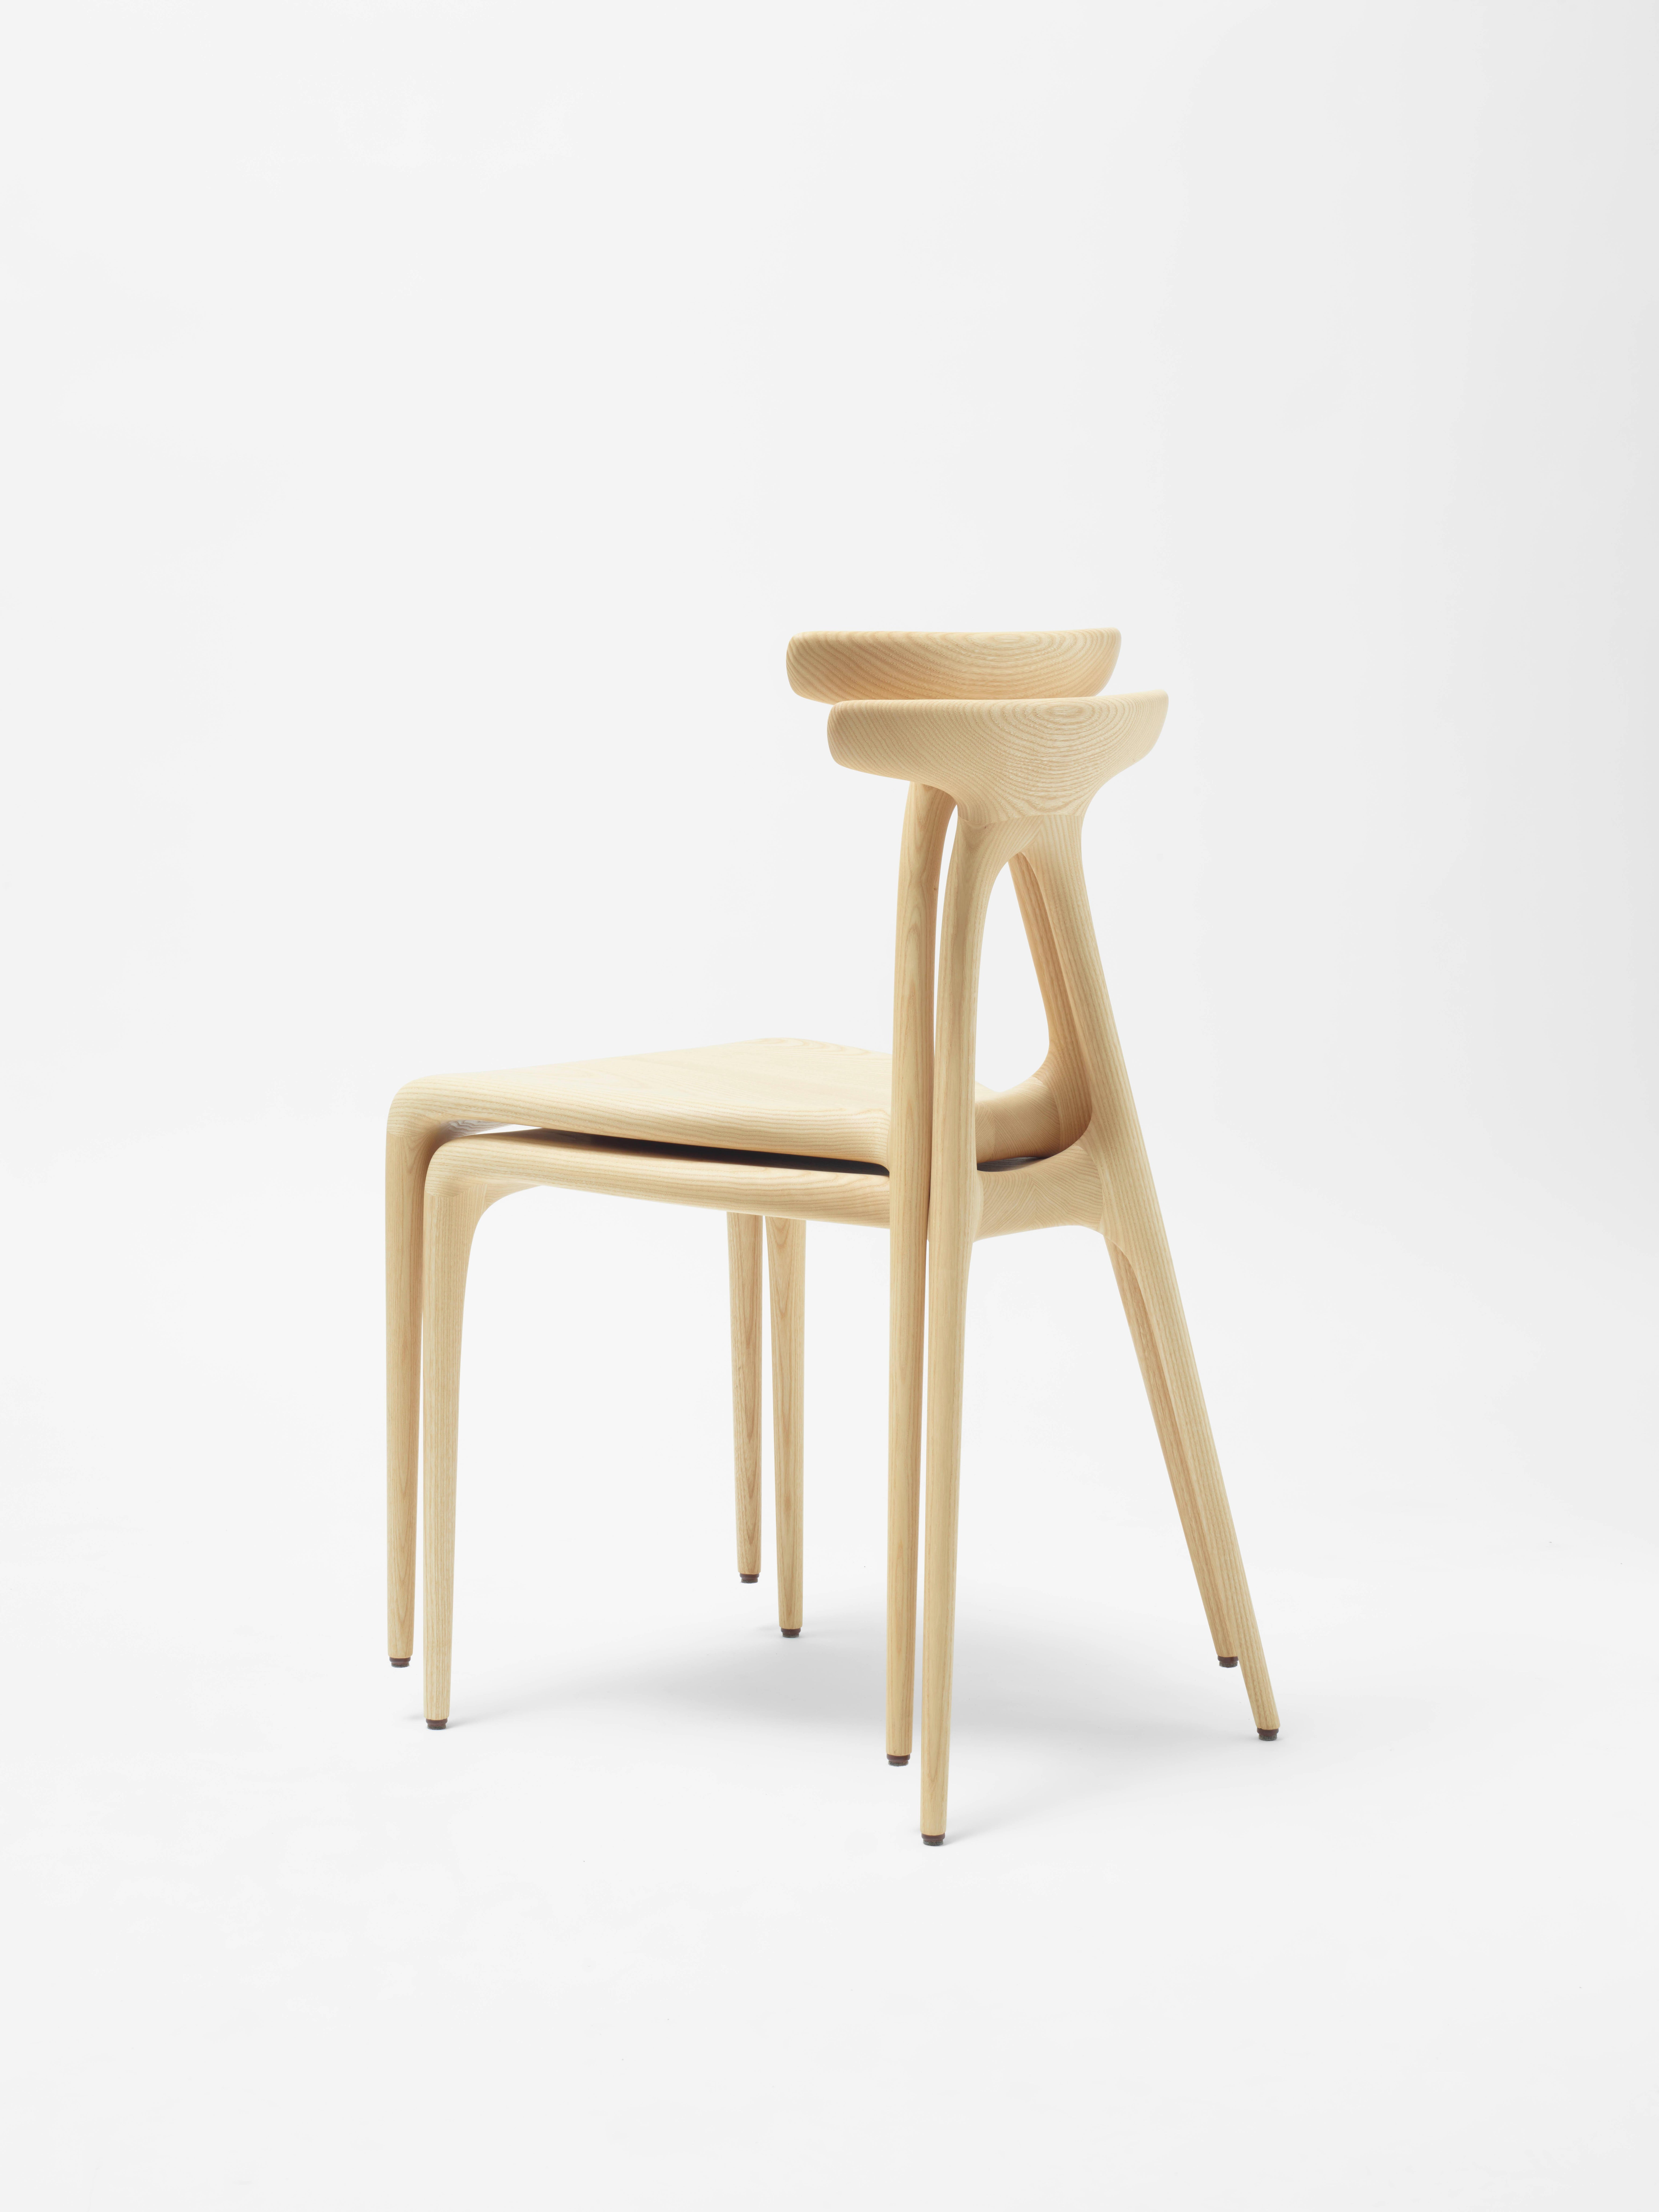 A contemporary solid-wood all-purpose stackable chair produced using the latest production technologies of shaped wooden furniture. The design boasts a strong architectural gesture that gives the chair its inherent strength: the a shaped structure